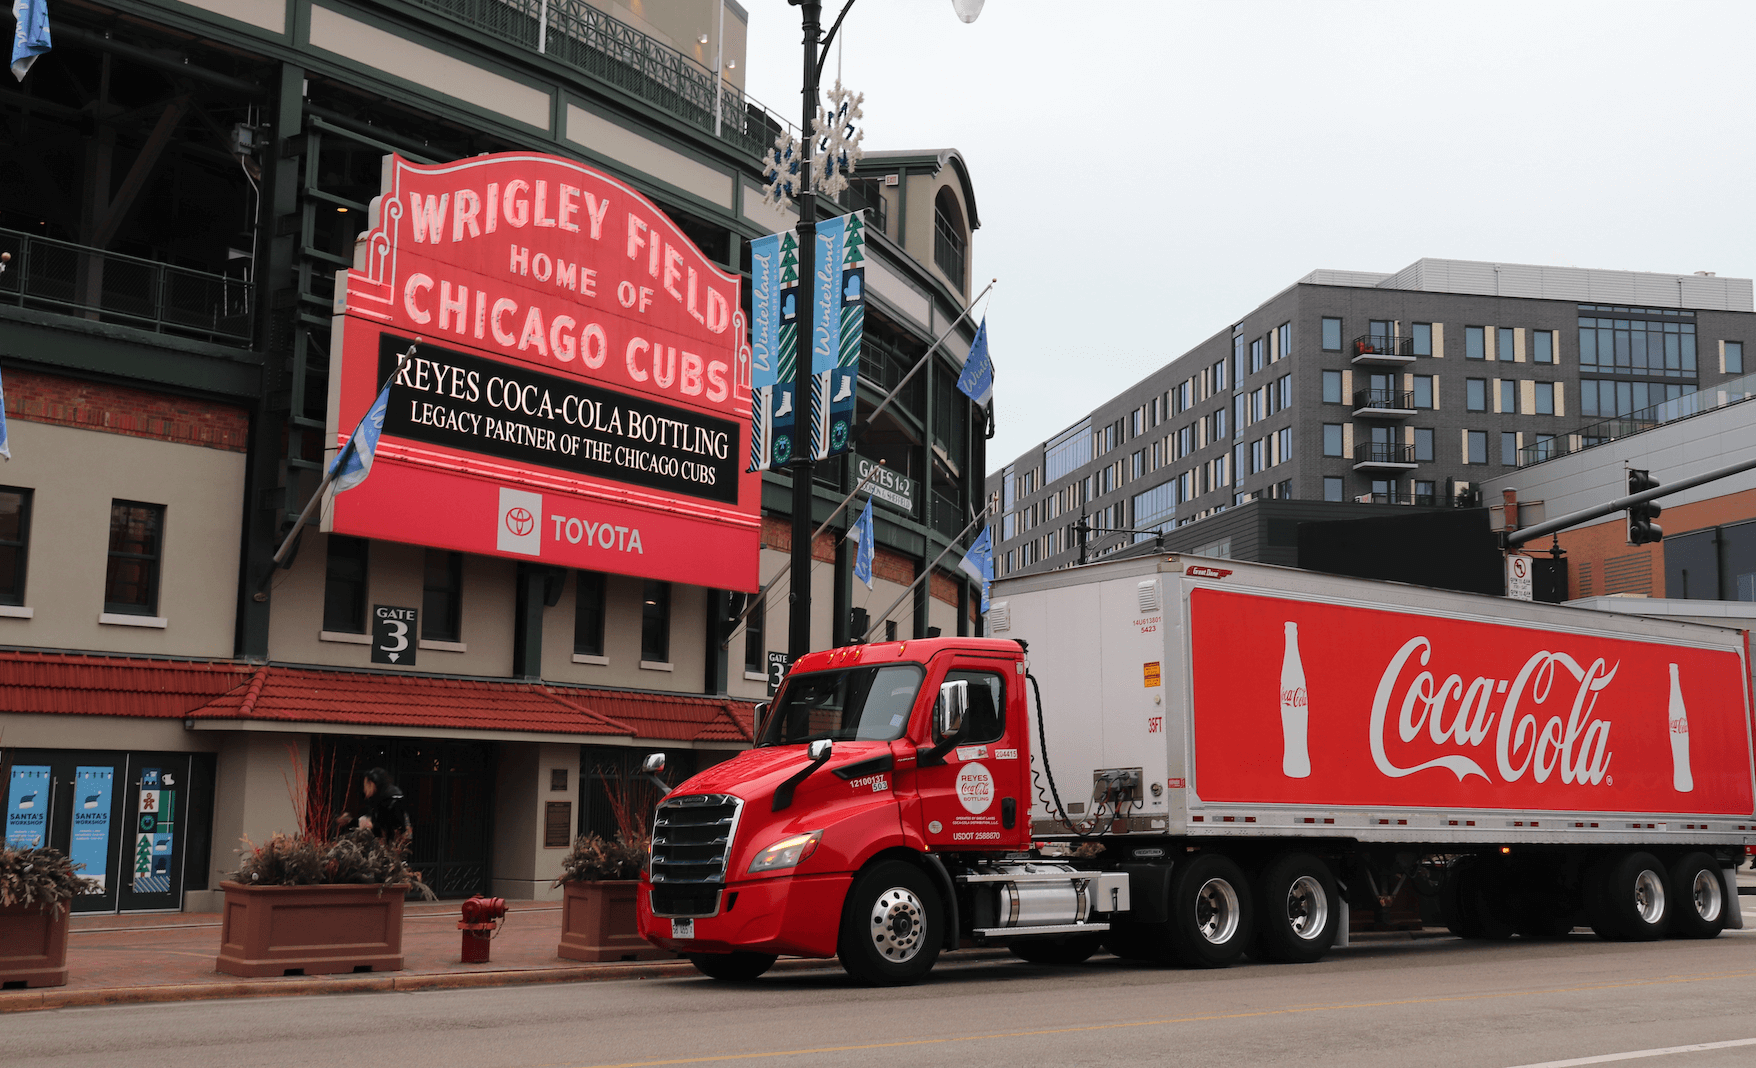 RCCB truck parked in front of Wrigley field sign